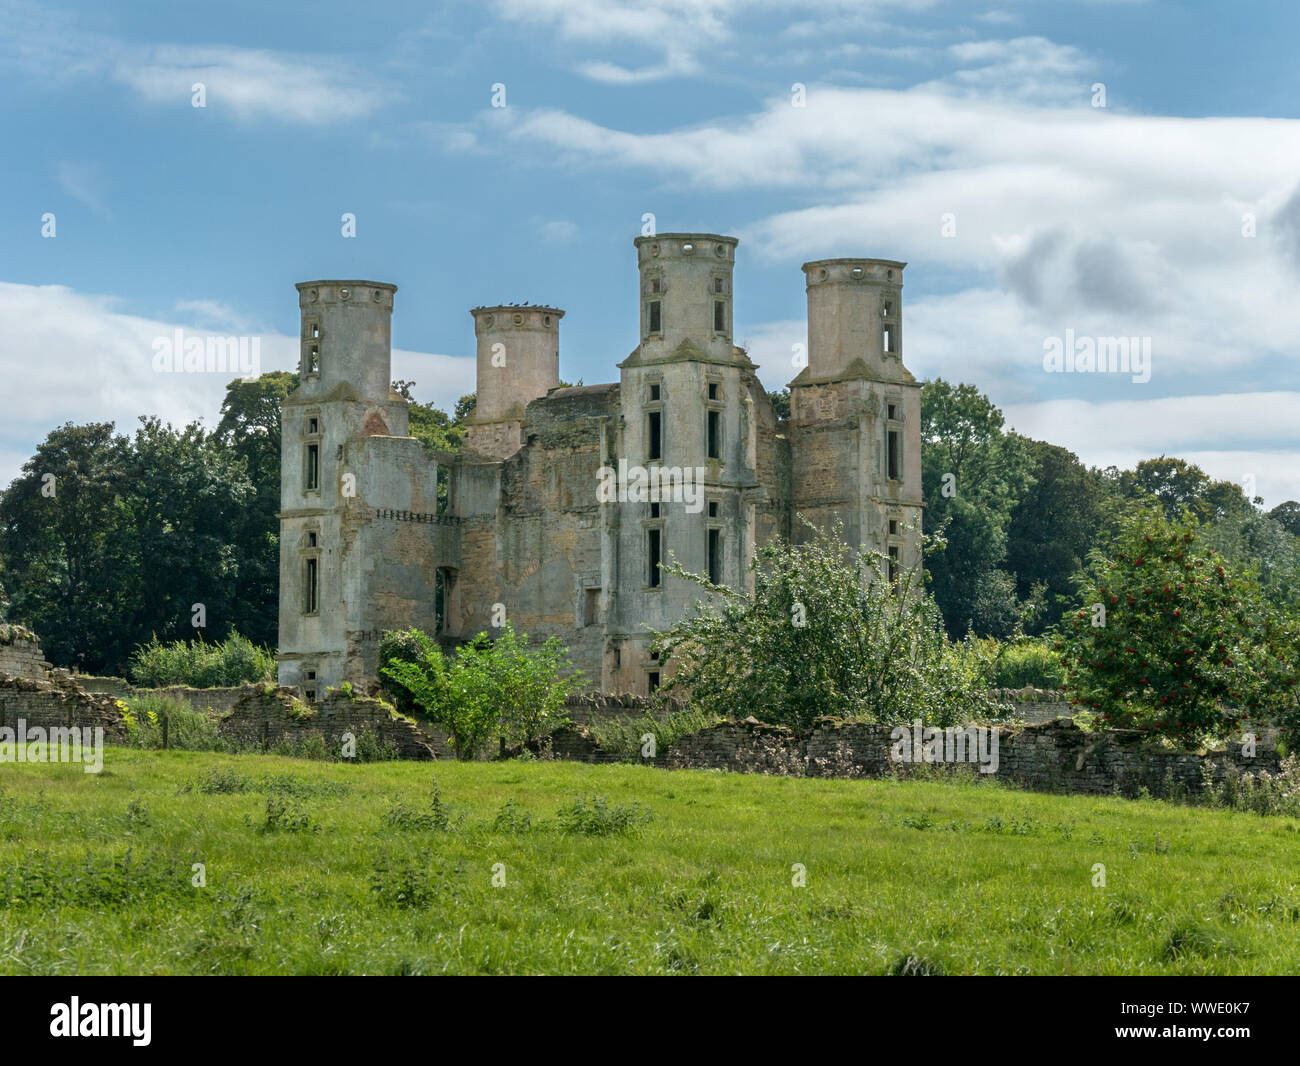 The ruins of Wothorpe Towers (a 17C Jacobean Lodge built by Thomas Cecil in the 1600s) near Stamford, Cambridgeshire, England, UK Stock Photo